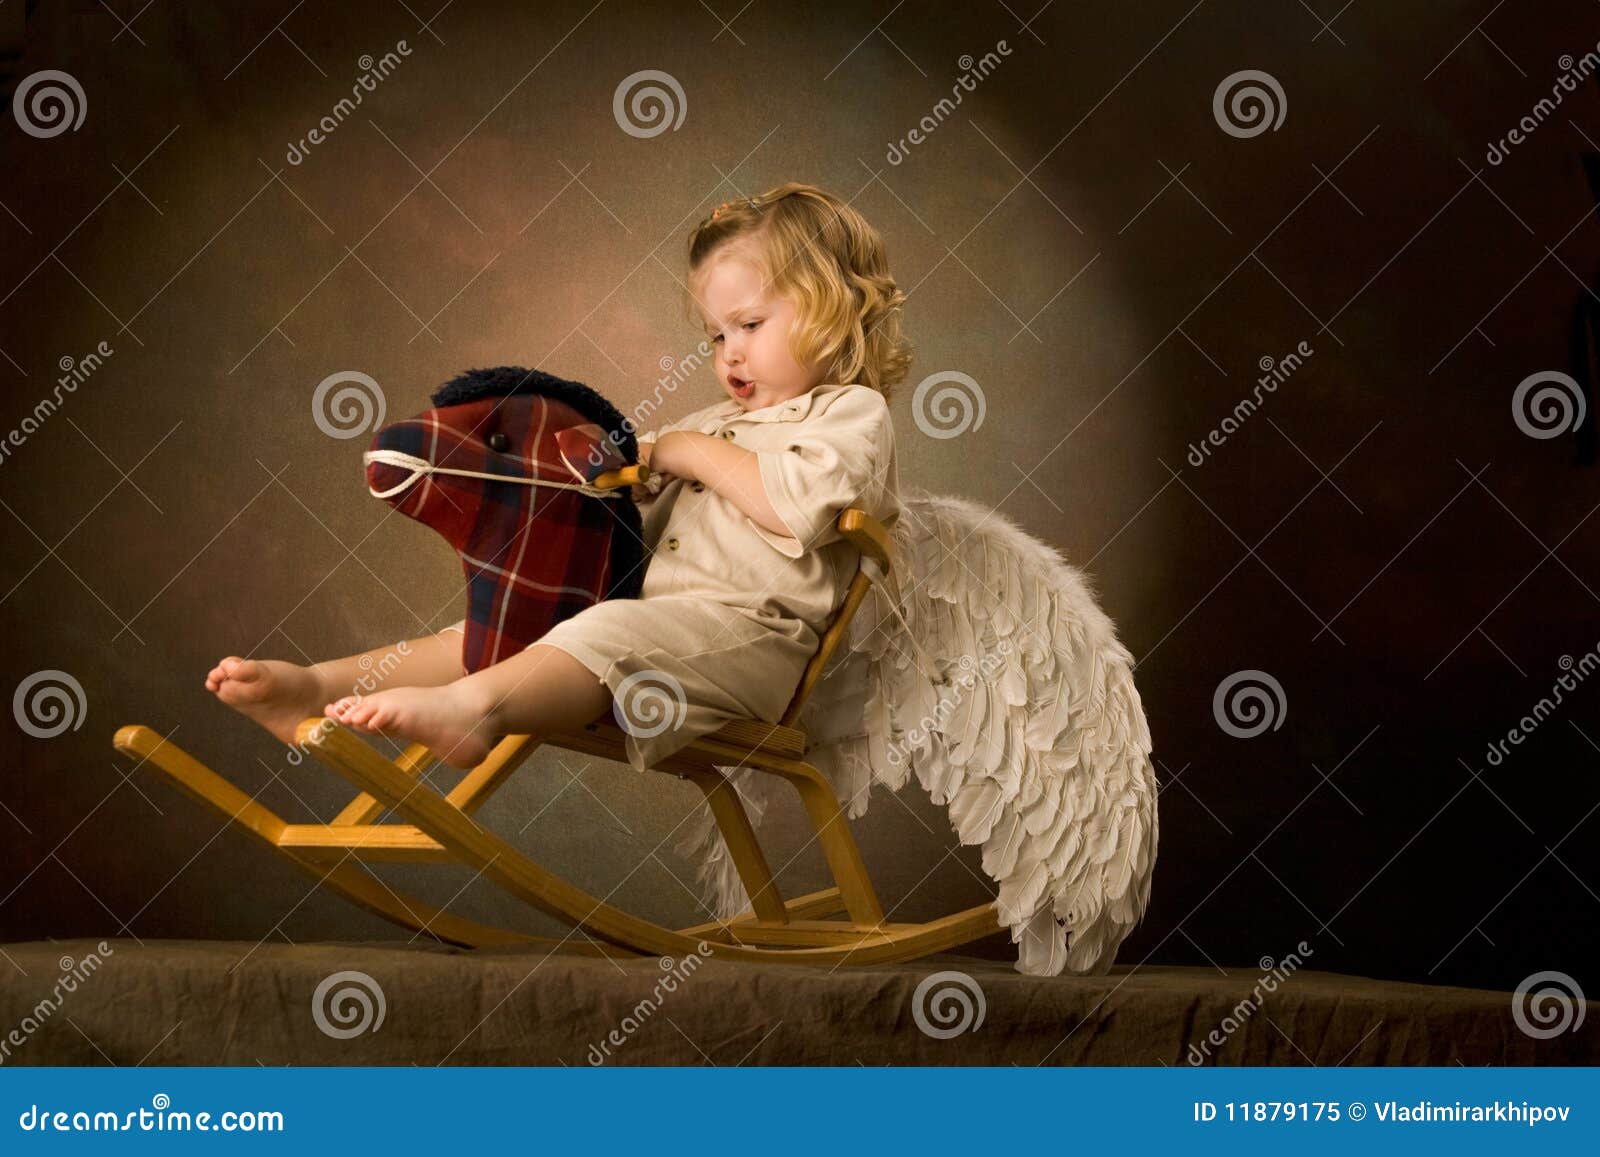 baby rides a woody horse